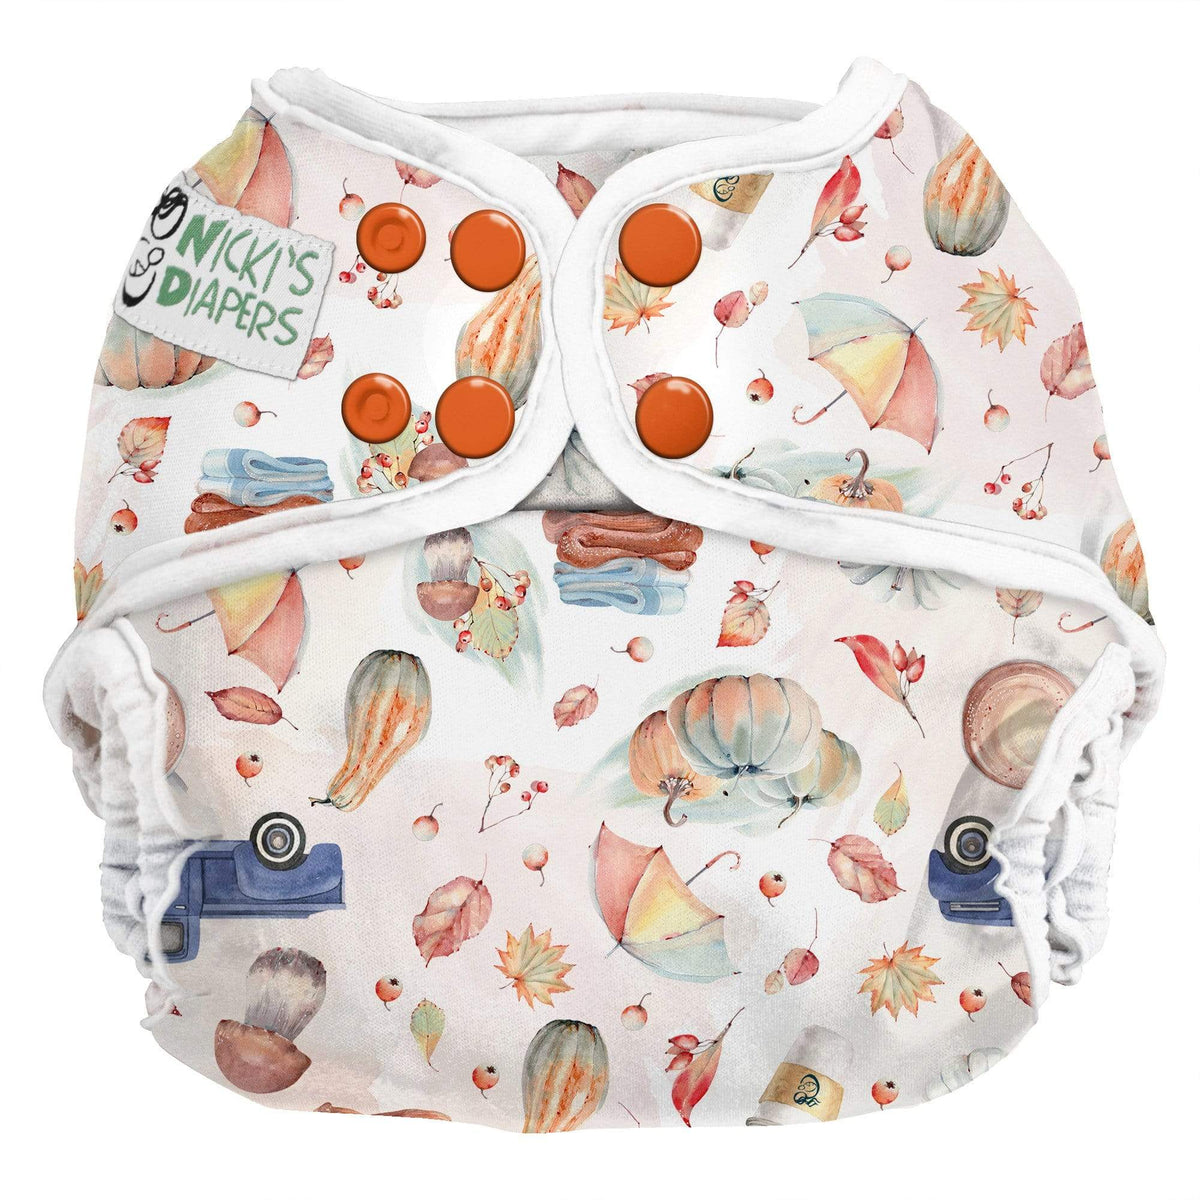 CLEARANCE: Nicki&#39;s Diapers Snap Cloth Diaper Cover Newborn / Sweater Weather